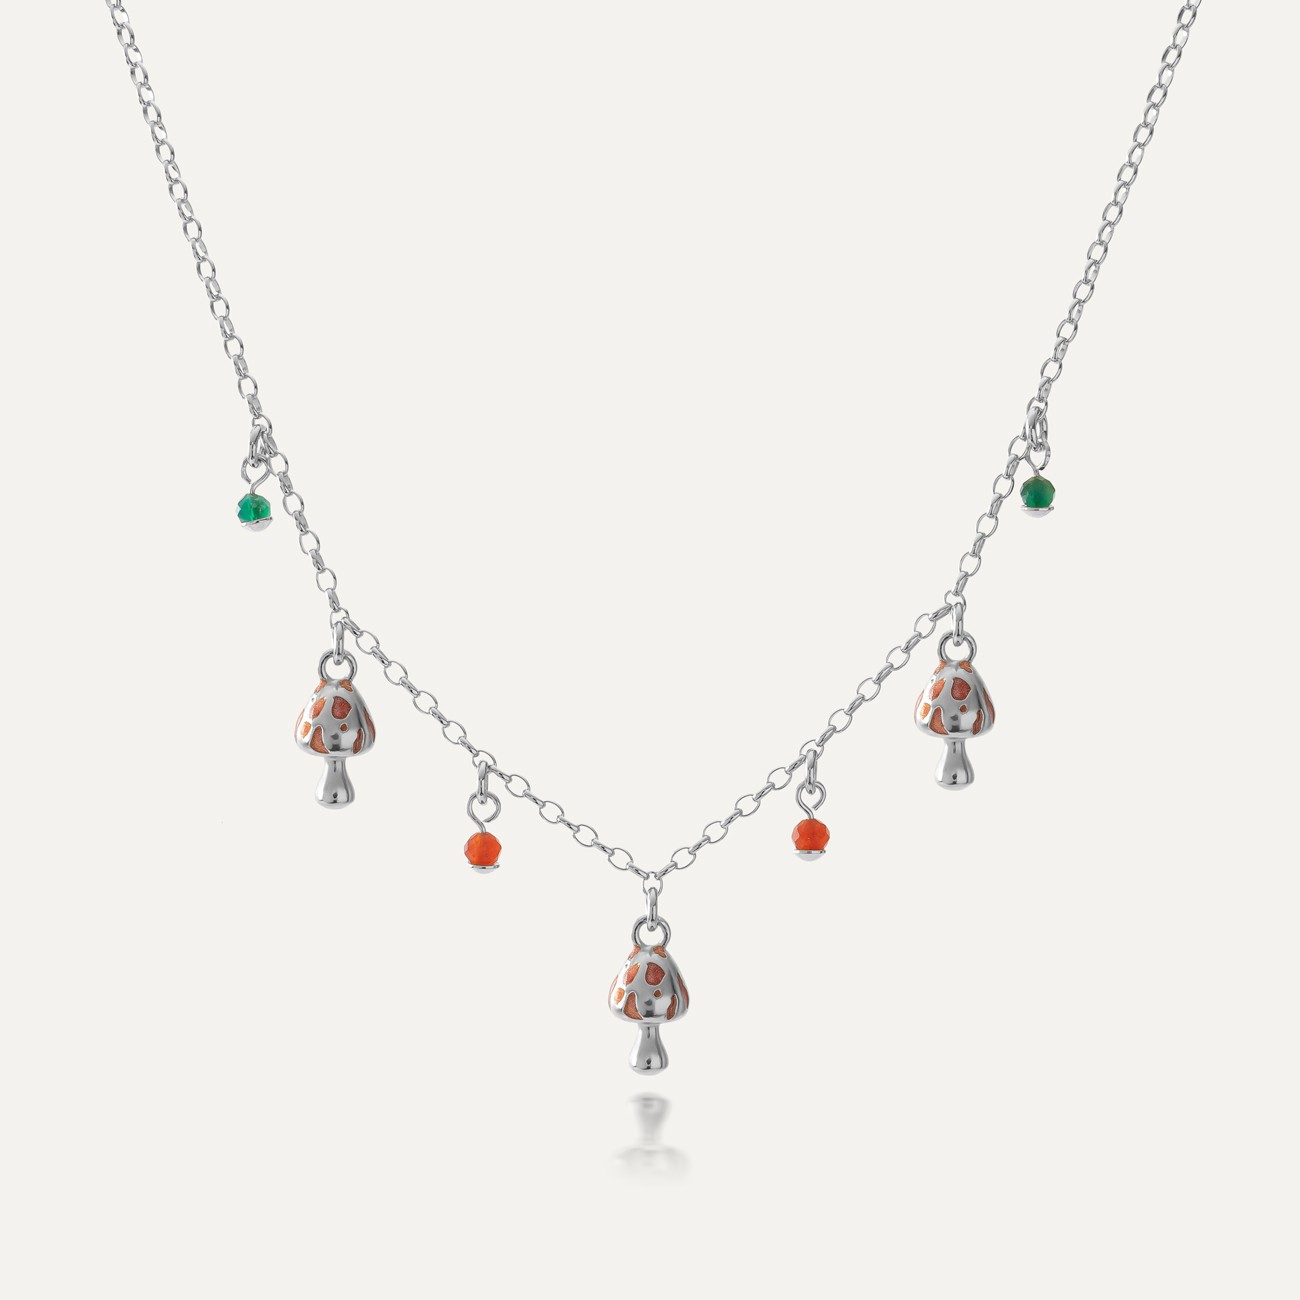 Mushroom and gemstone necklace,sterling silver 925